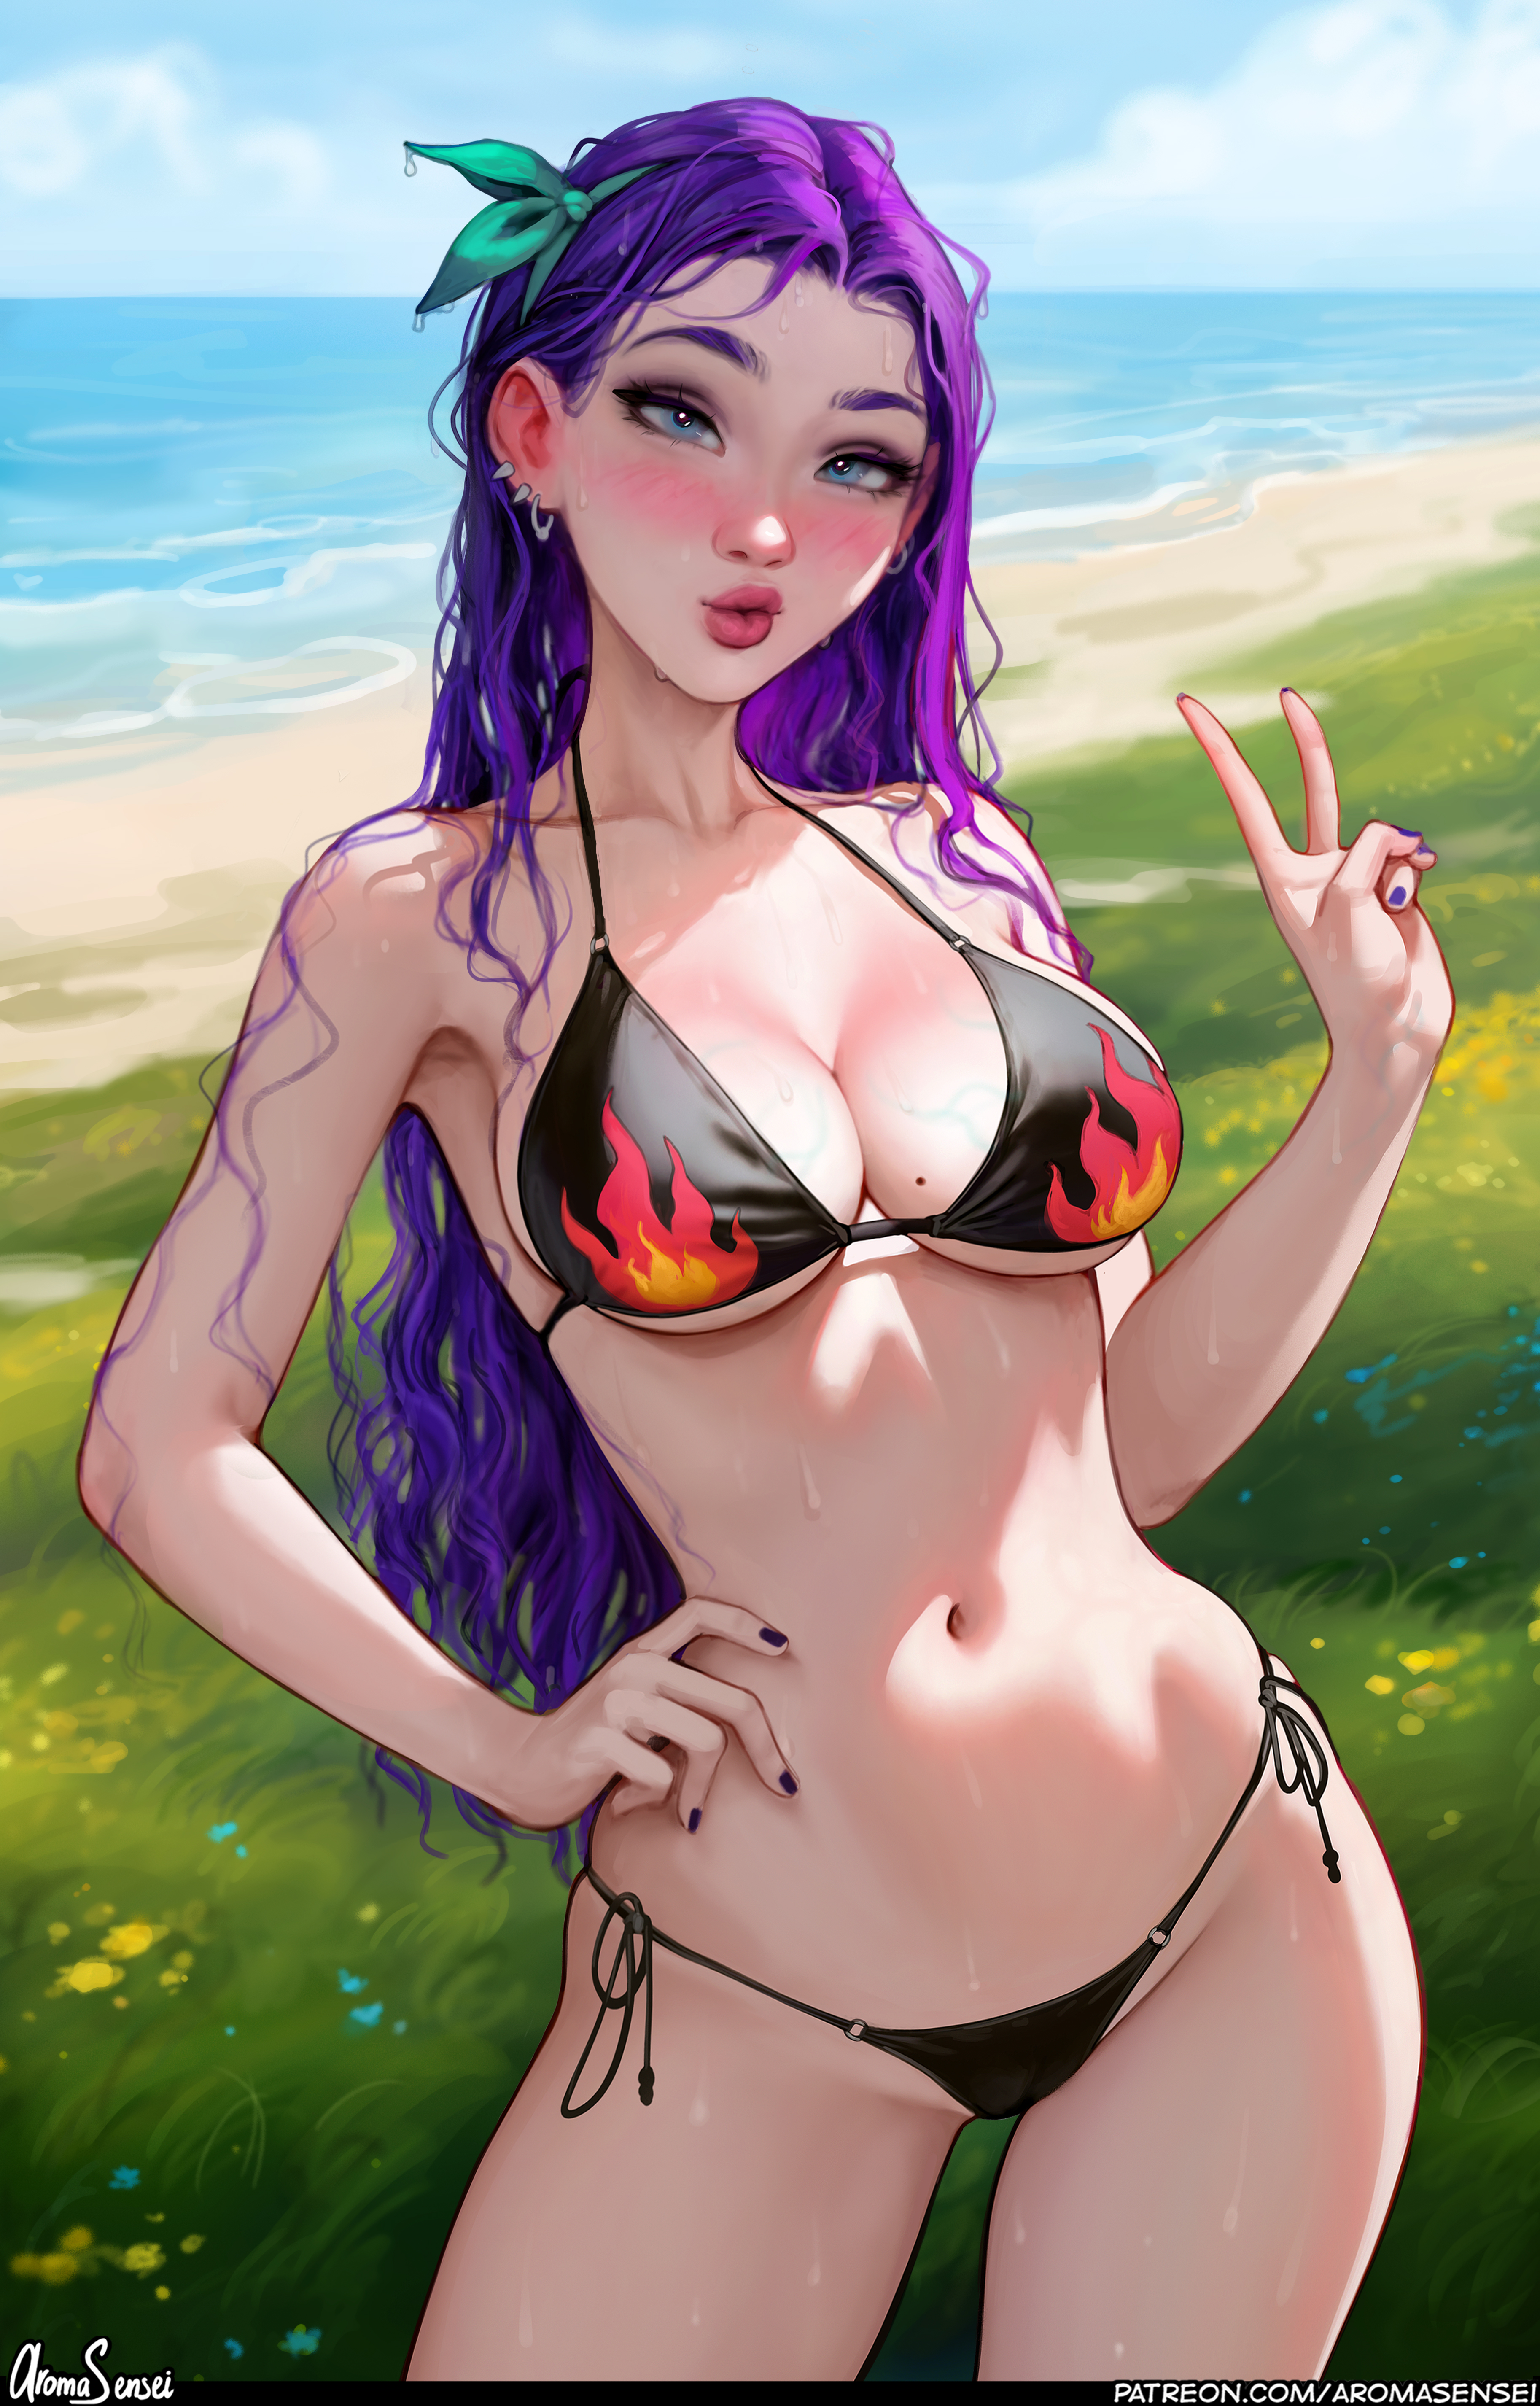 General 3652x5705 Abigail (Stardew Valley) video game girls artwork drawing fan art swimwear Aroma Sensei belly button frontal view standing cleavage hands on hips bikini painted nails wet body wet hair long hair purple hair watermarked women on beach boobs Stardew Valley sunlight video games slim body juicy lips collarbone water ear piercing skinny hips grass outdoors women outdoors peace sign portrait display looking at viewer blushing